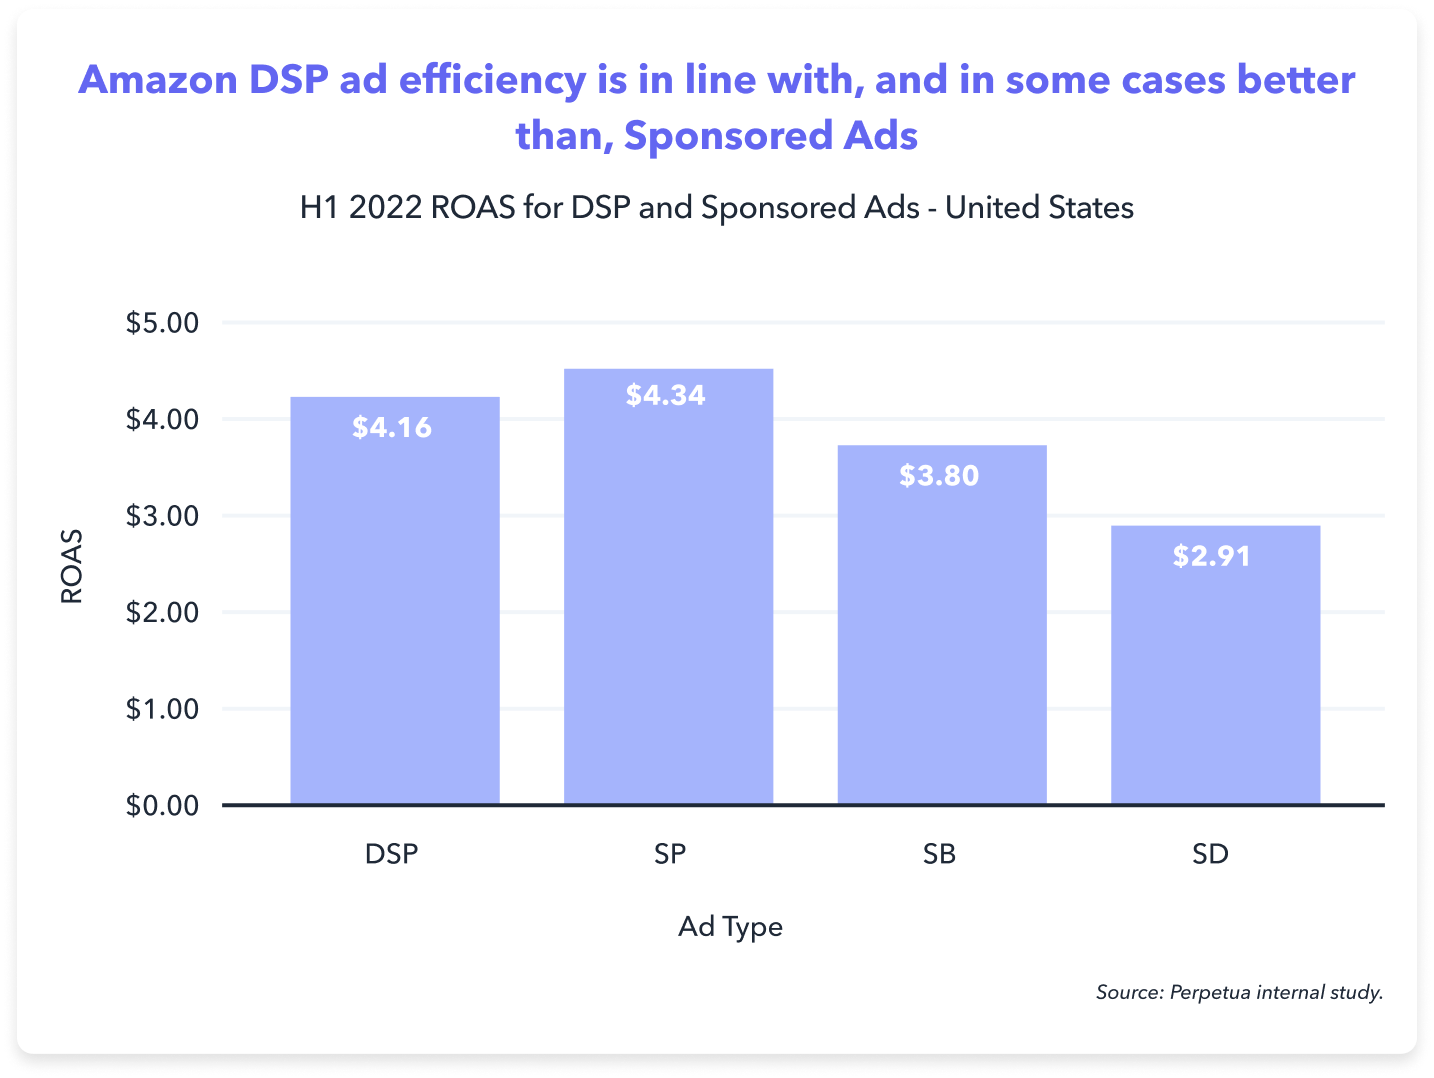 Amazon DSP ad efficiency is in line with, and in some cases better than, Sponsored Ads